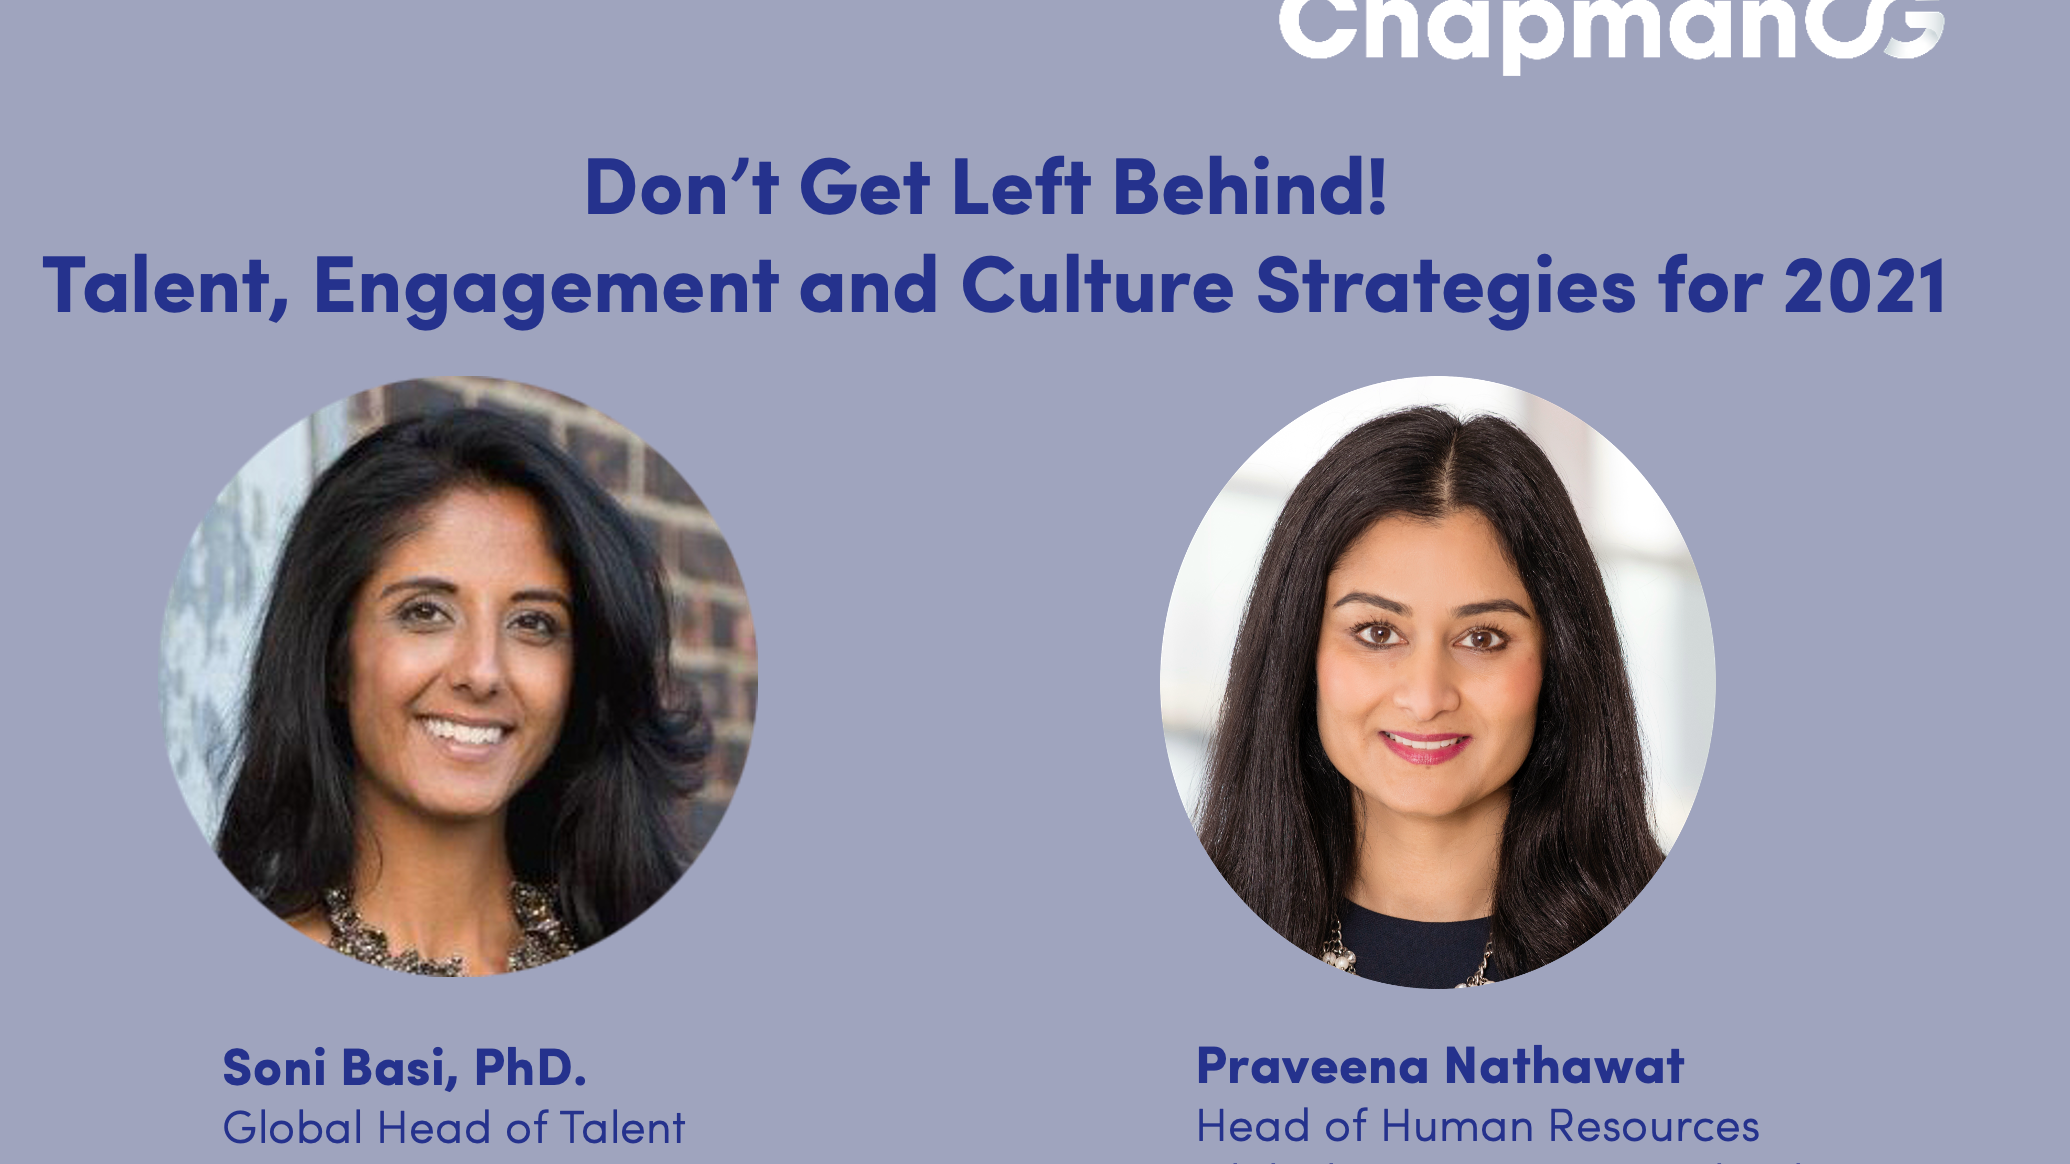 Don’t Get Left Behind! Talent, Engagement and Culture Strategies for 2021